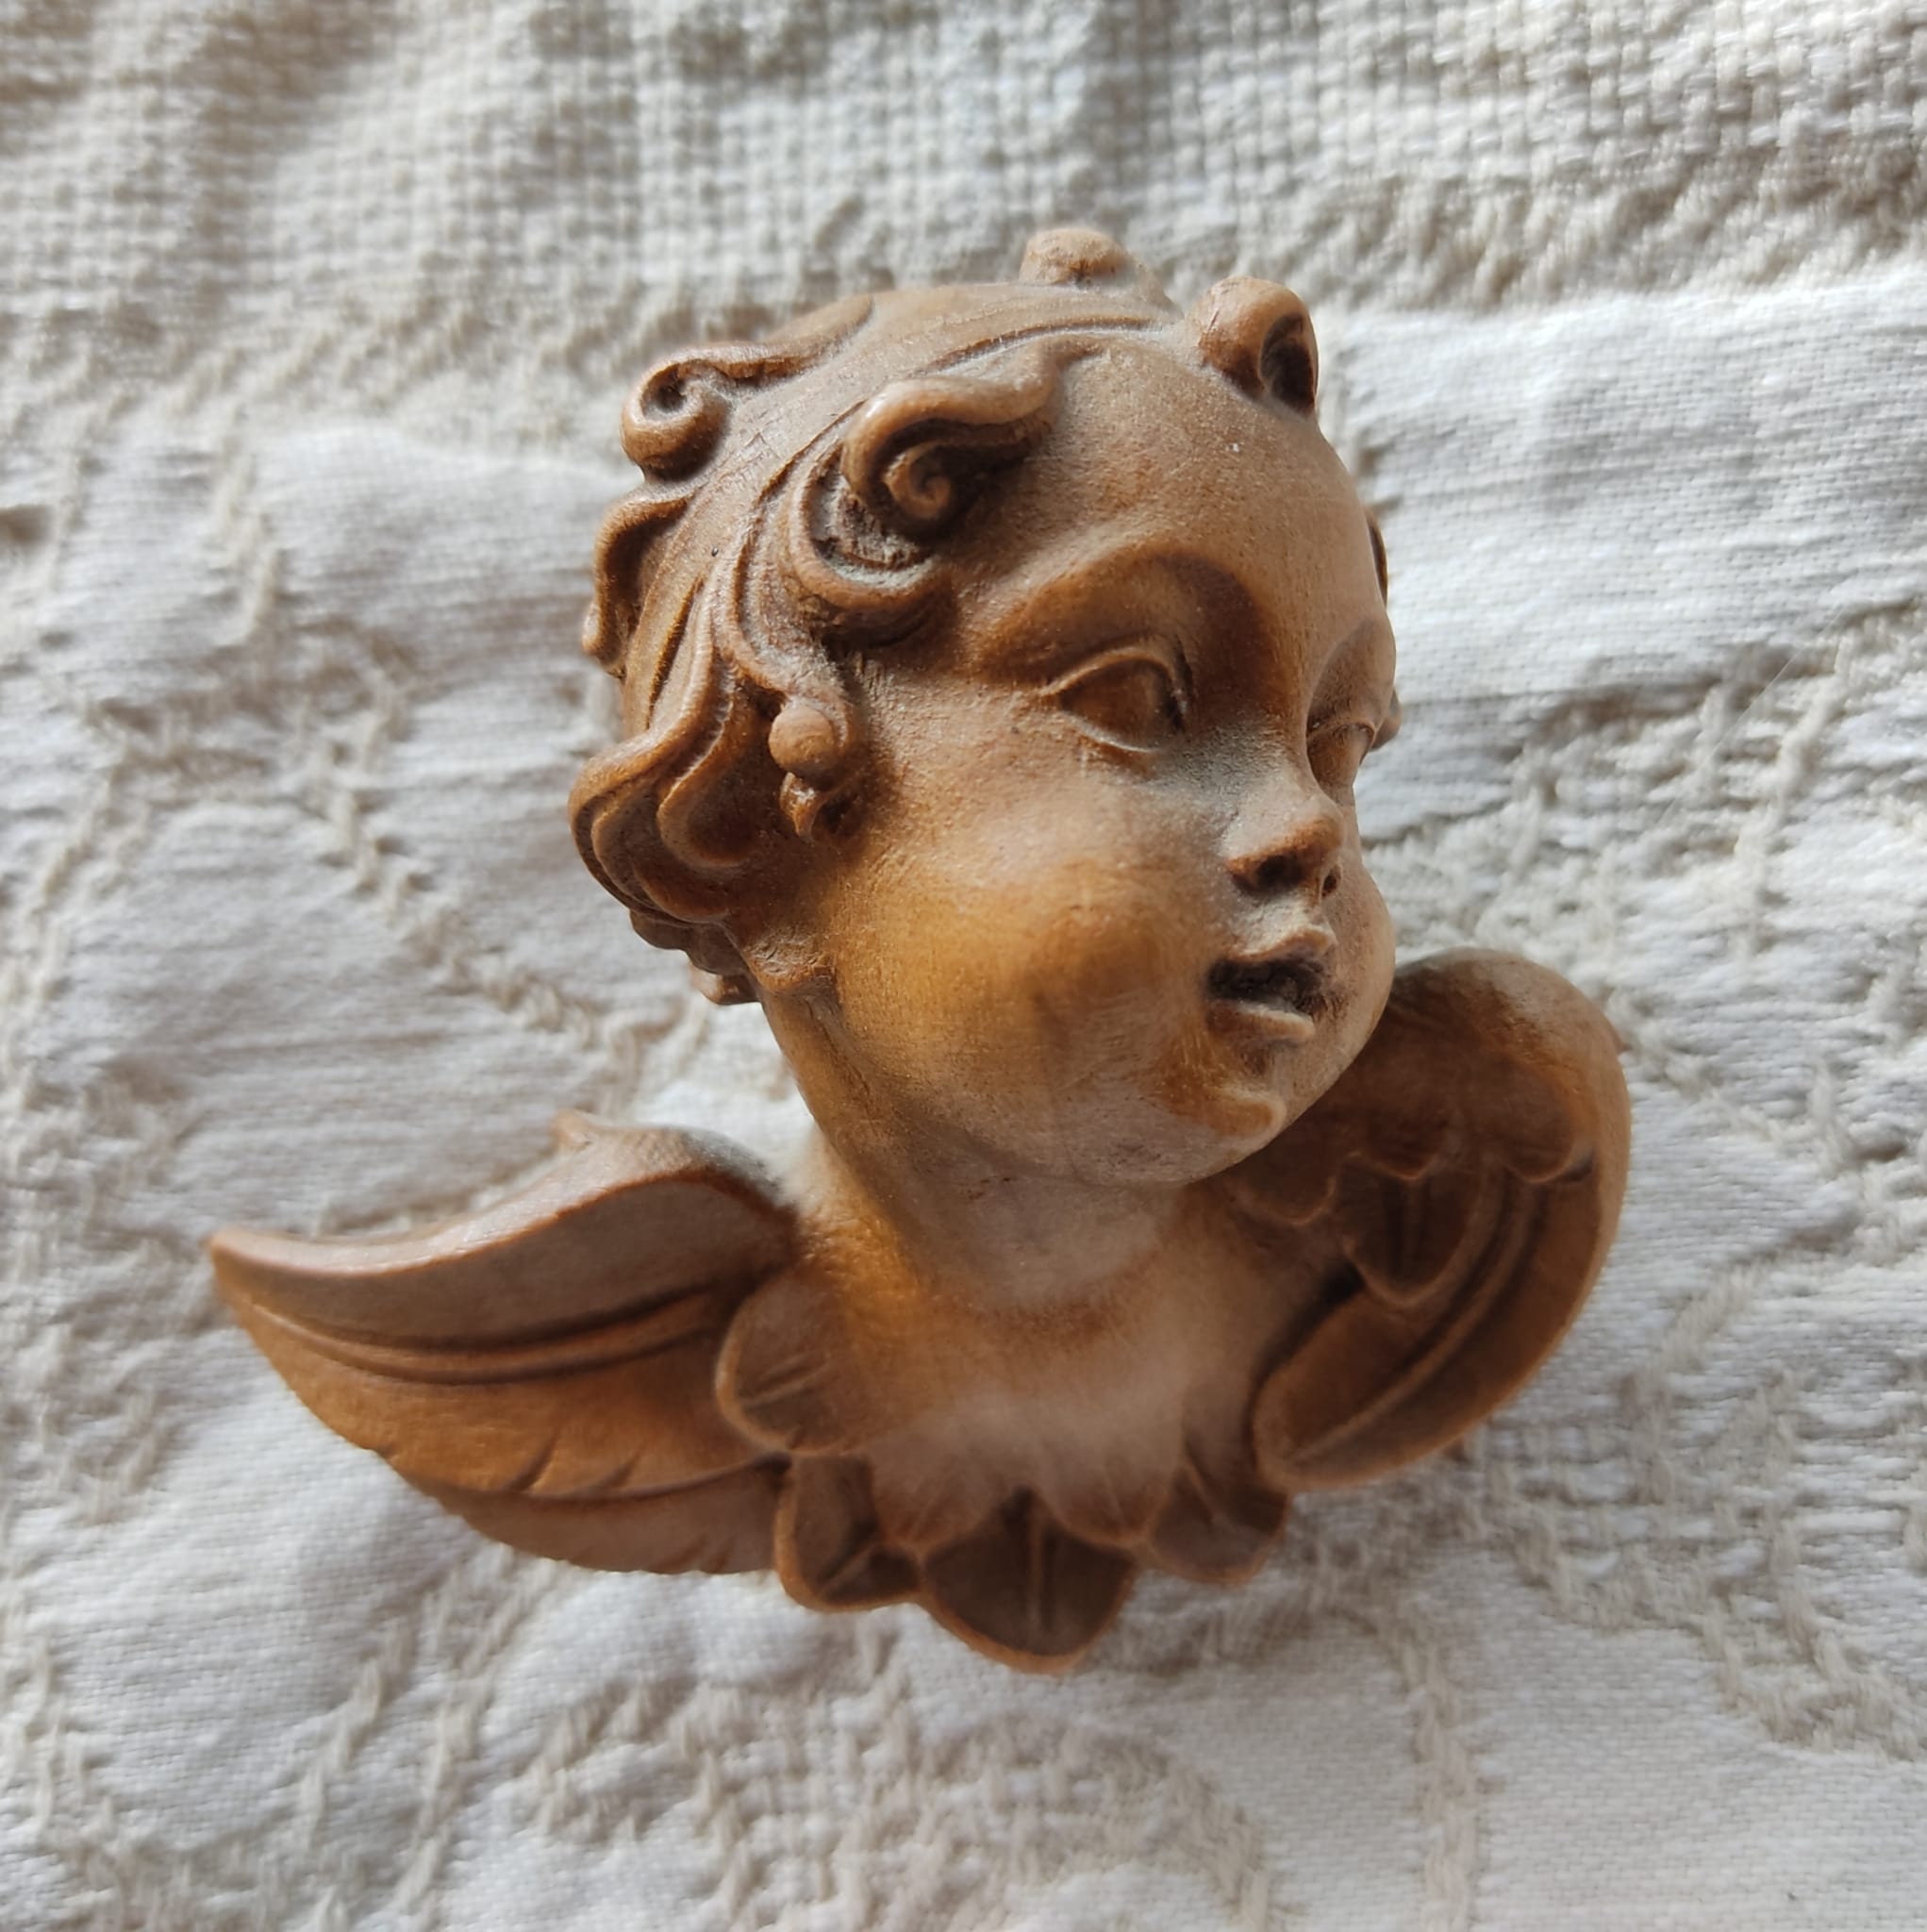 ANTIQUE Heads Art Old Kong Wood Face - Putti Lovely 2 Hong Alpine Carving Carved Wood Putto Angel Folk Angel Lime Etsy Handcrafted